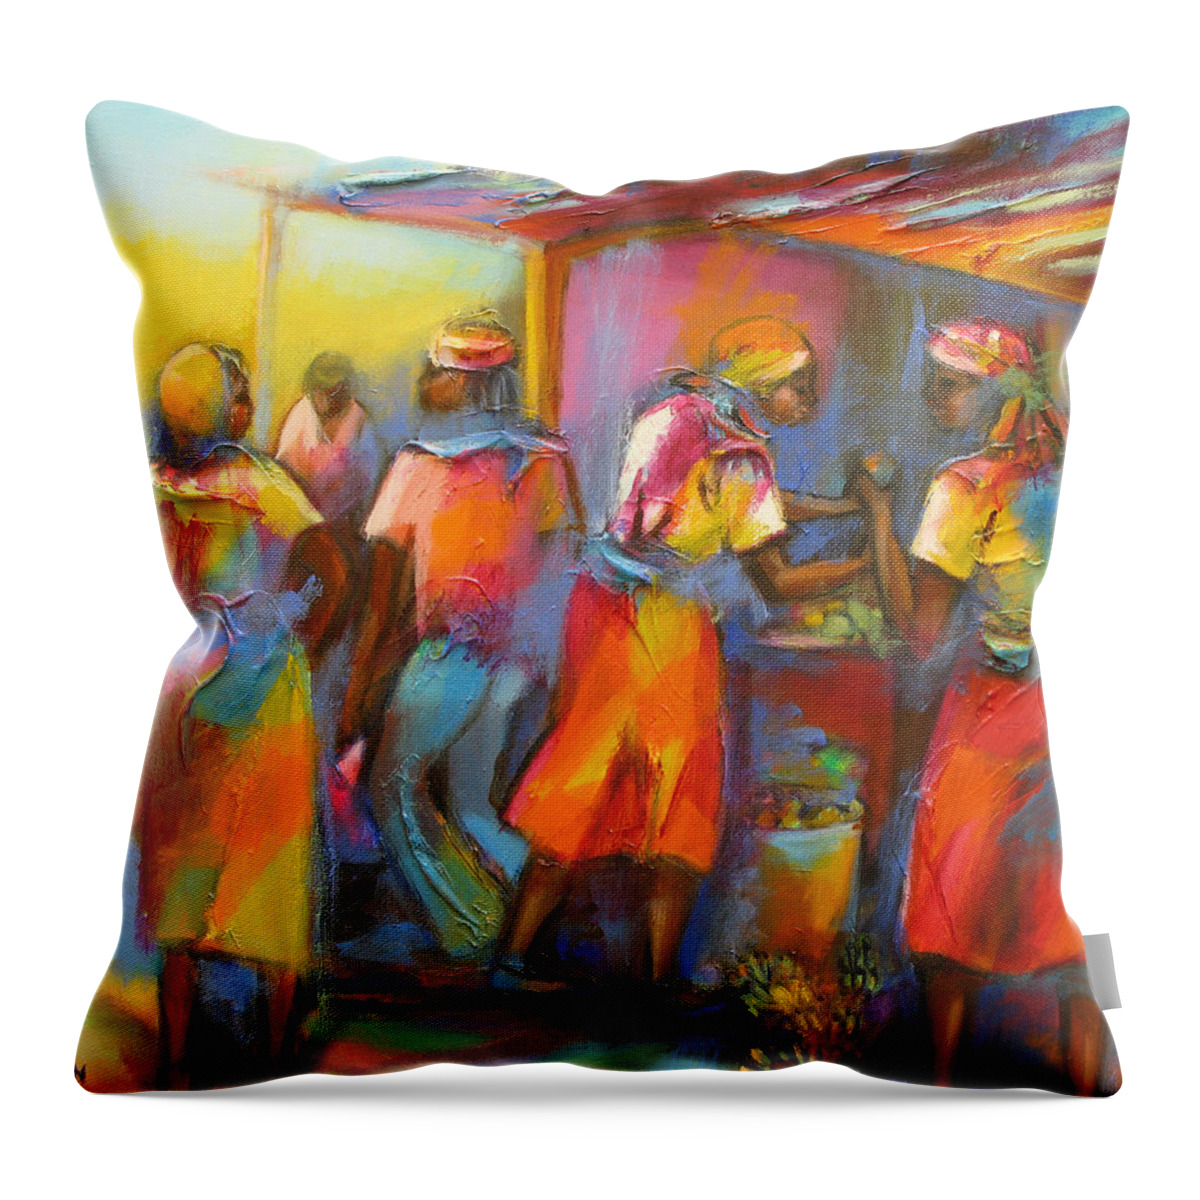 Market Throw Pillow featuring the painting Market Day by Cynthia McLean